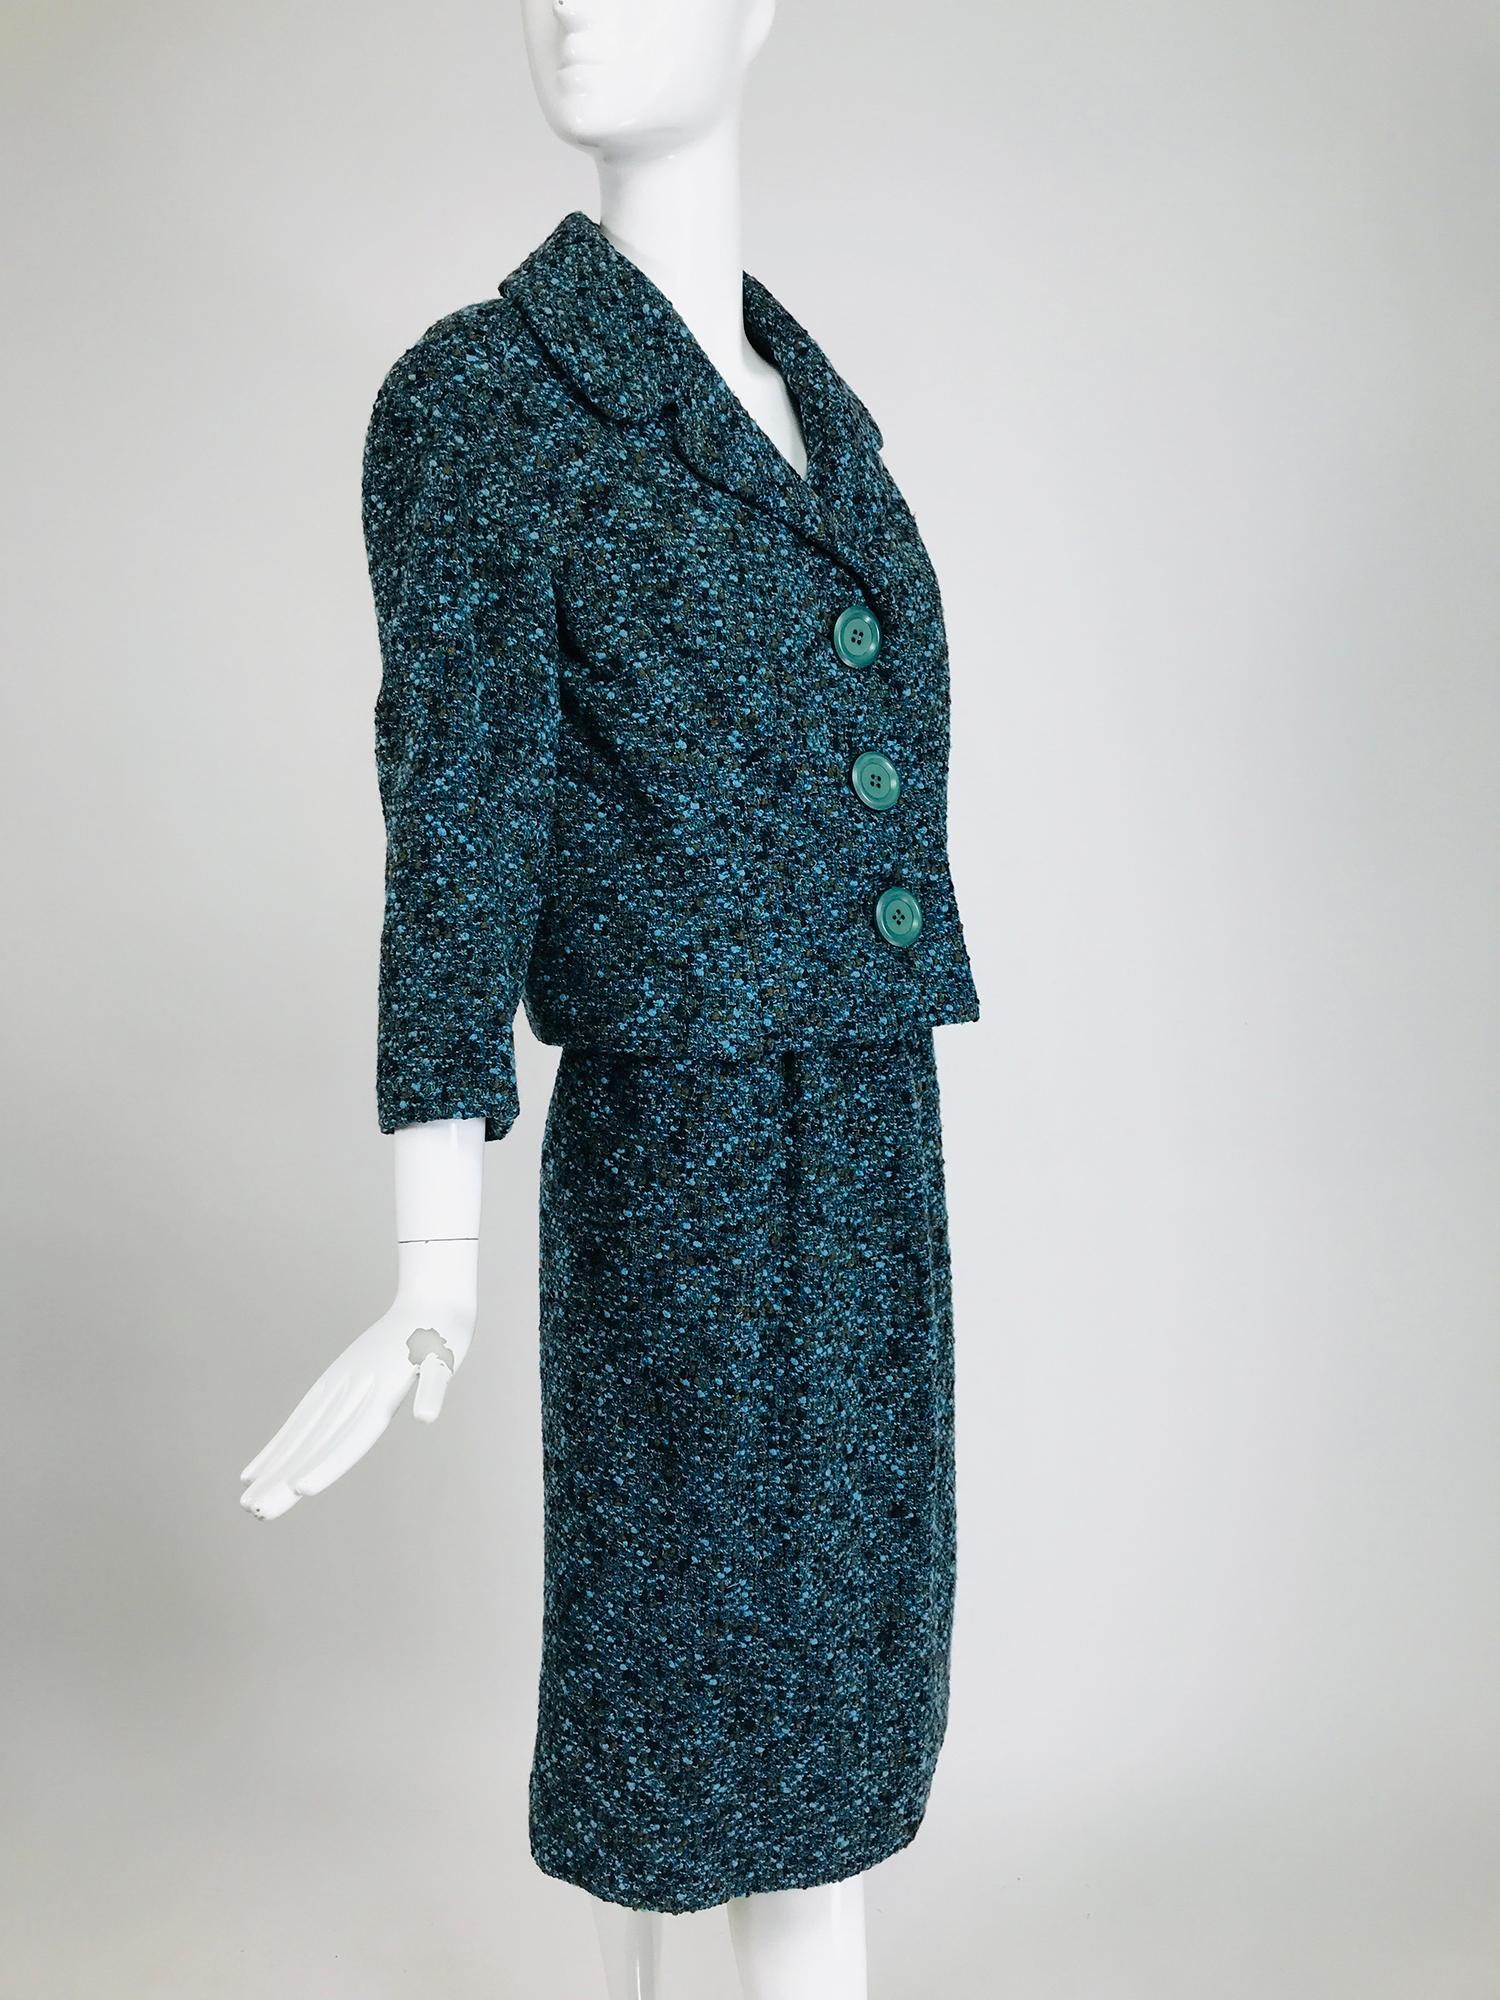 Jeanne Lanvin Numbered Couture Early 1960s Blue Tweed Skirt Suit  For Sale 4